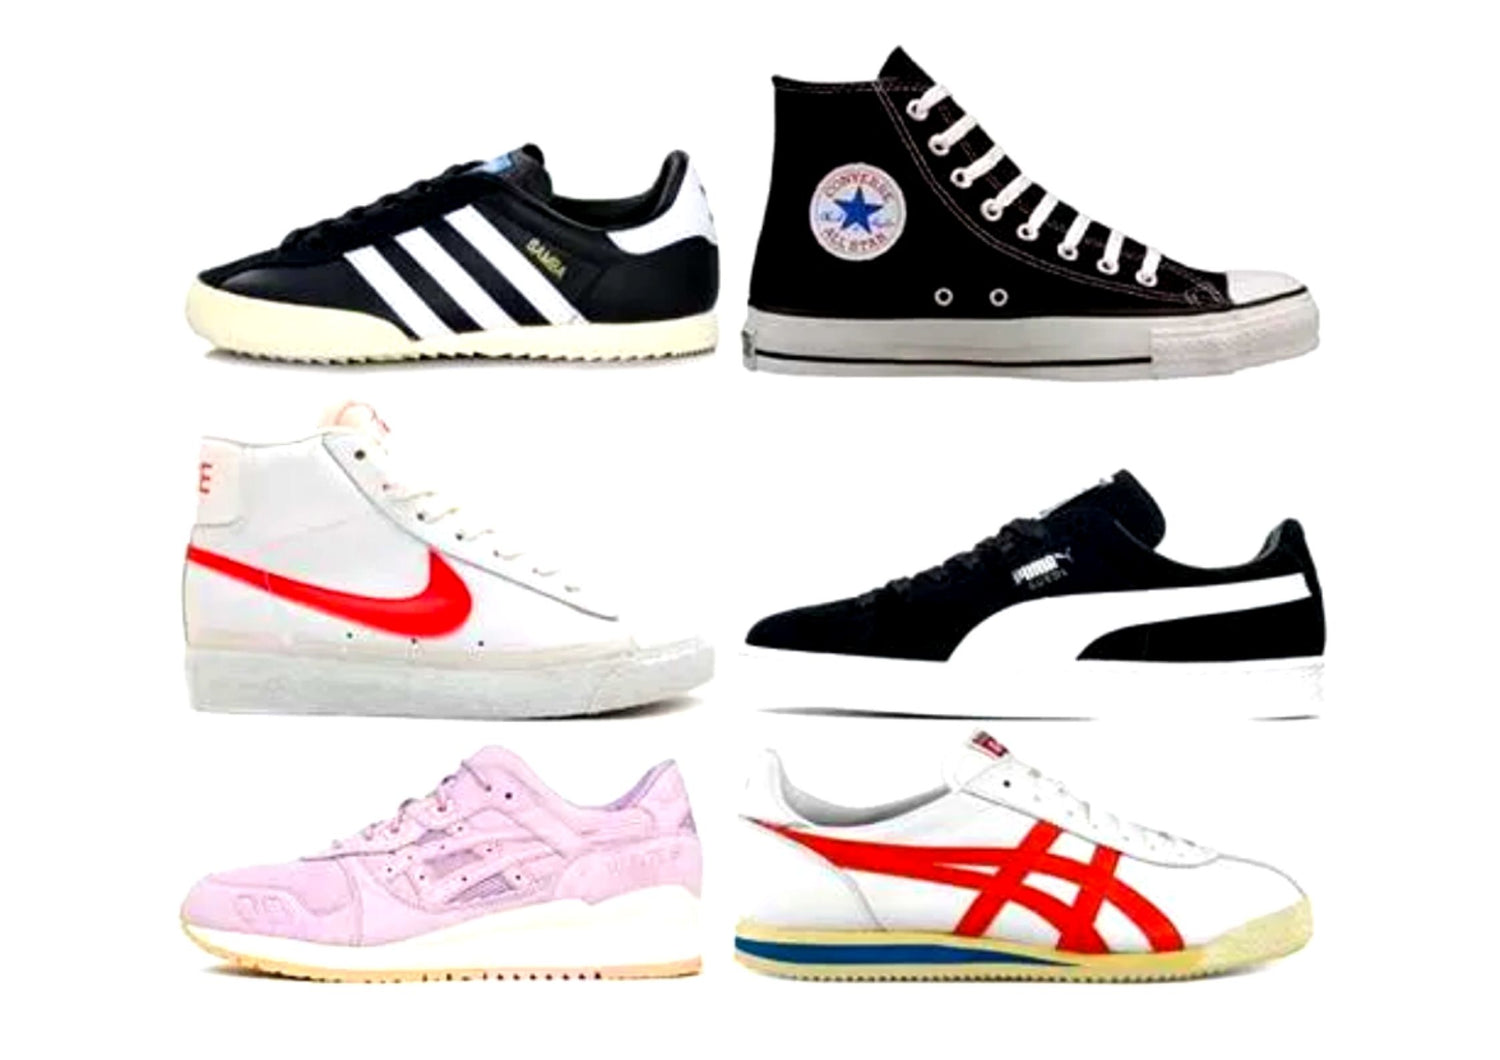 The Greatest Sneakers of All Time